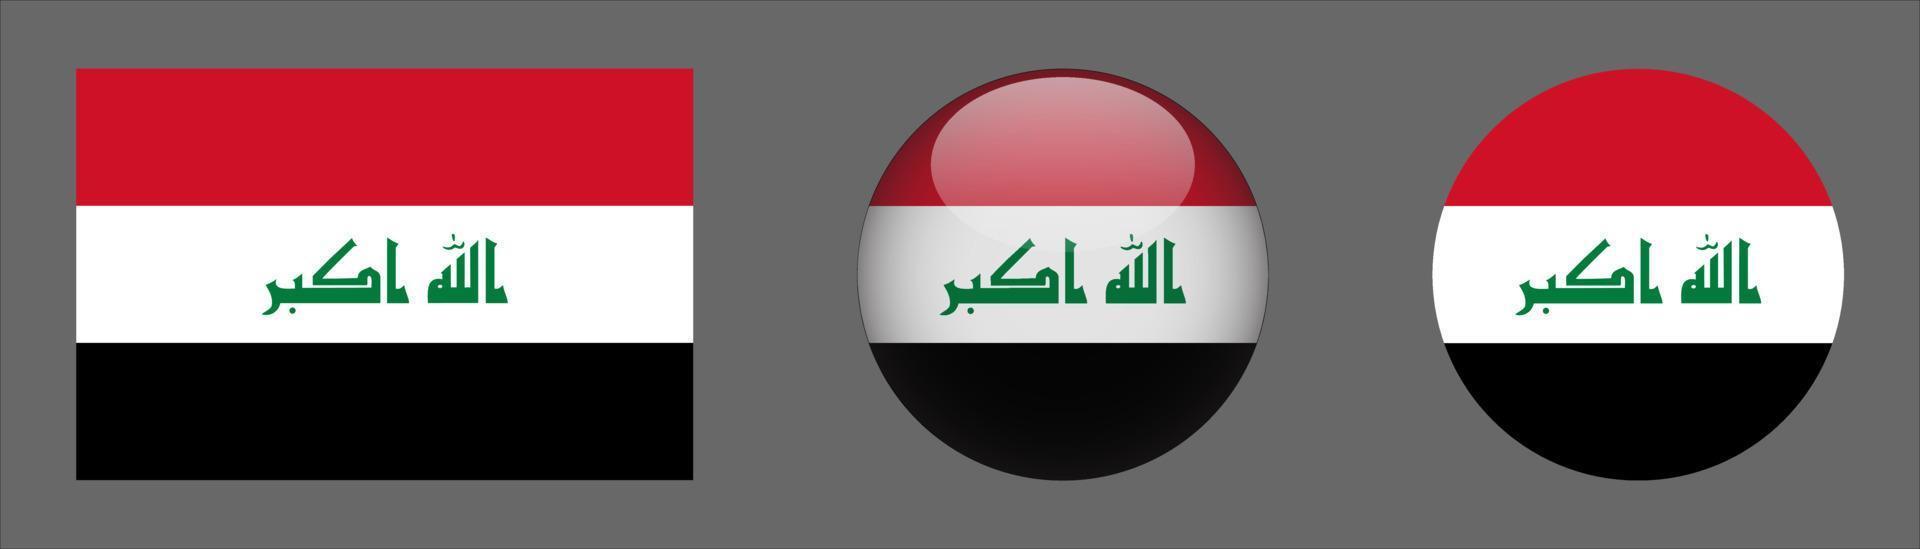 Iraq Flag Set Collection, Original Size Ratio, 3d Rounded and Flat Rounded vector